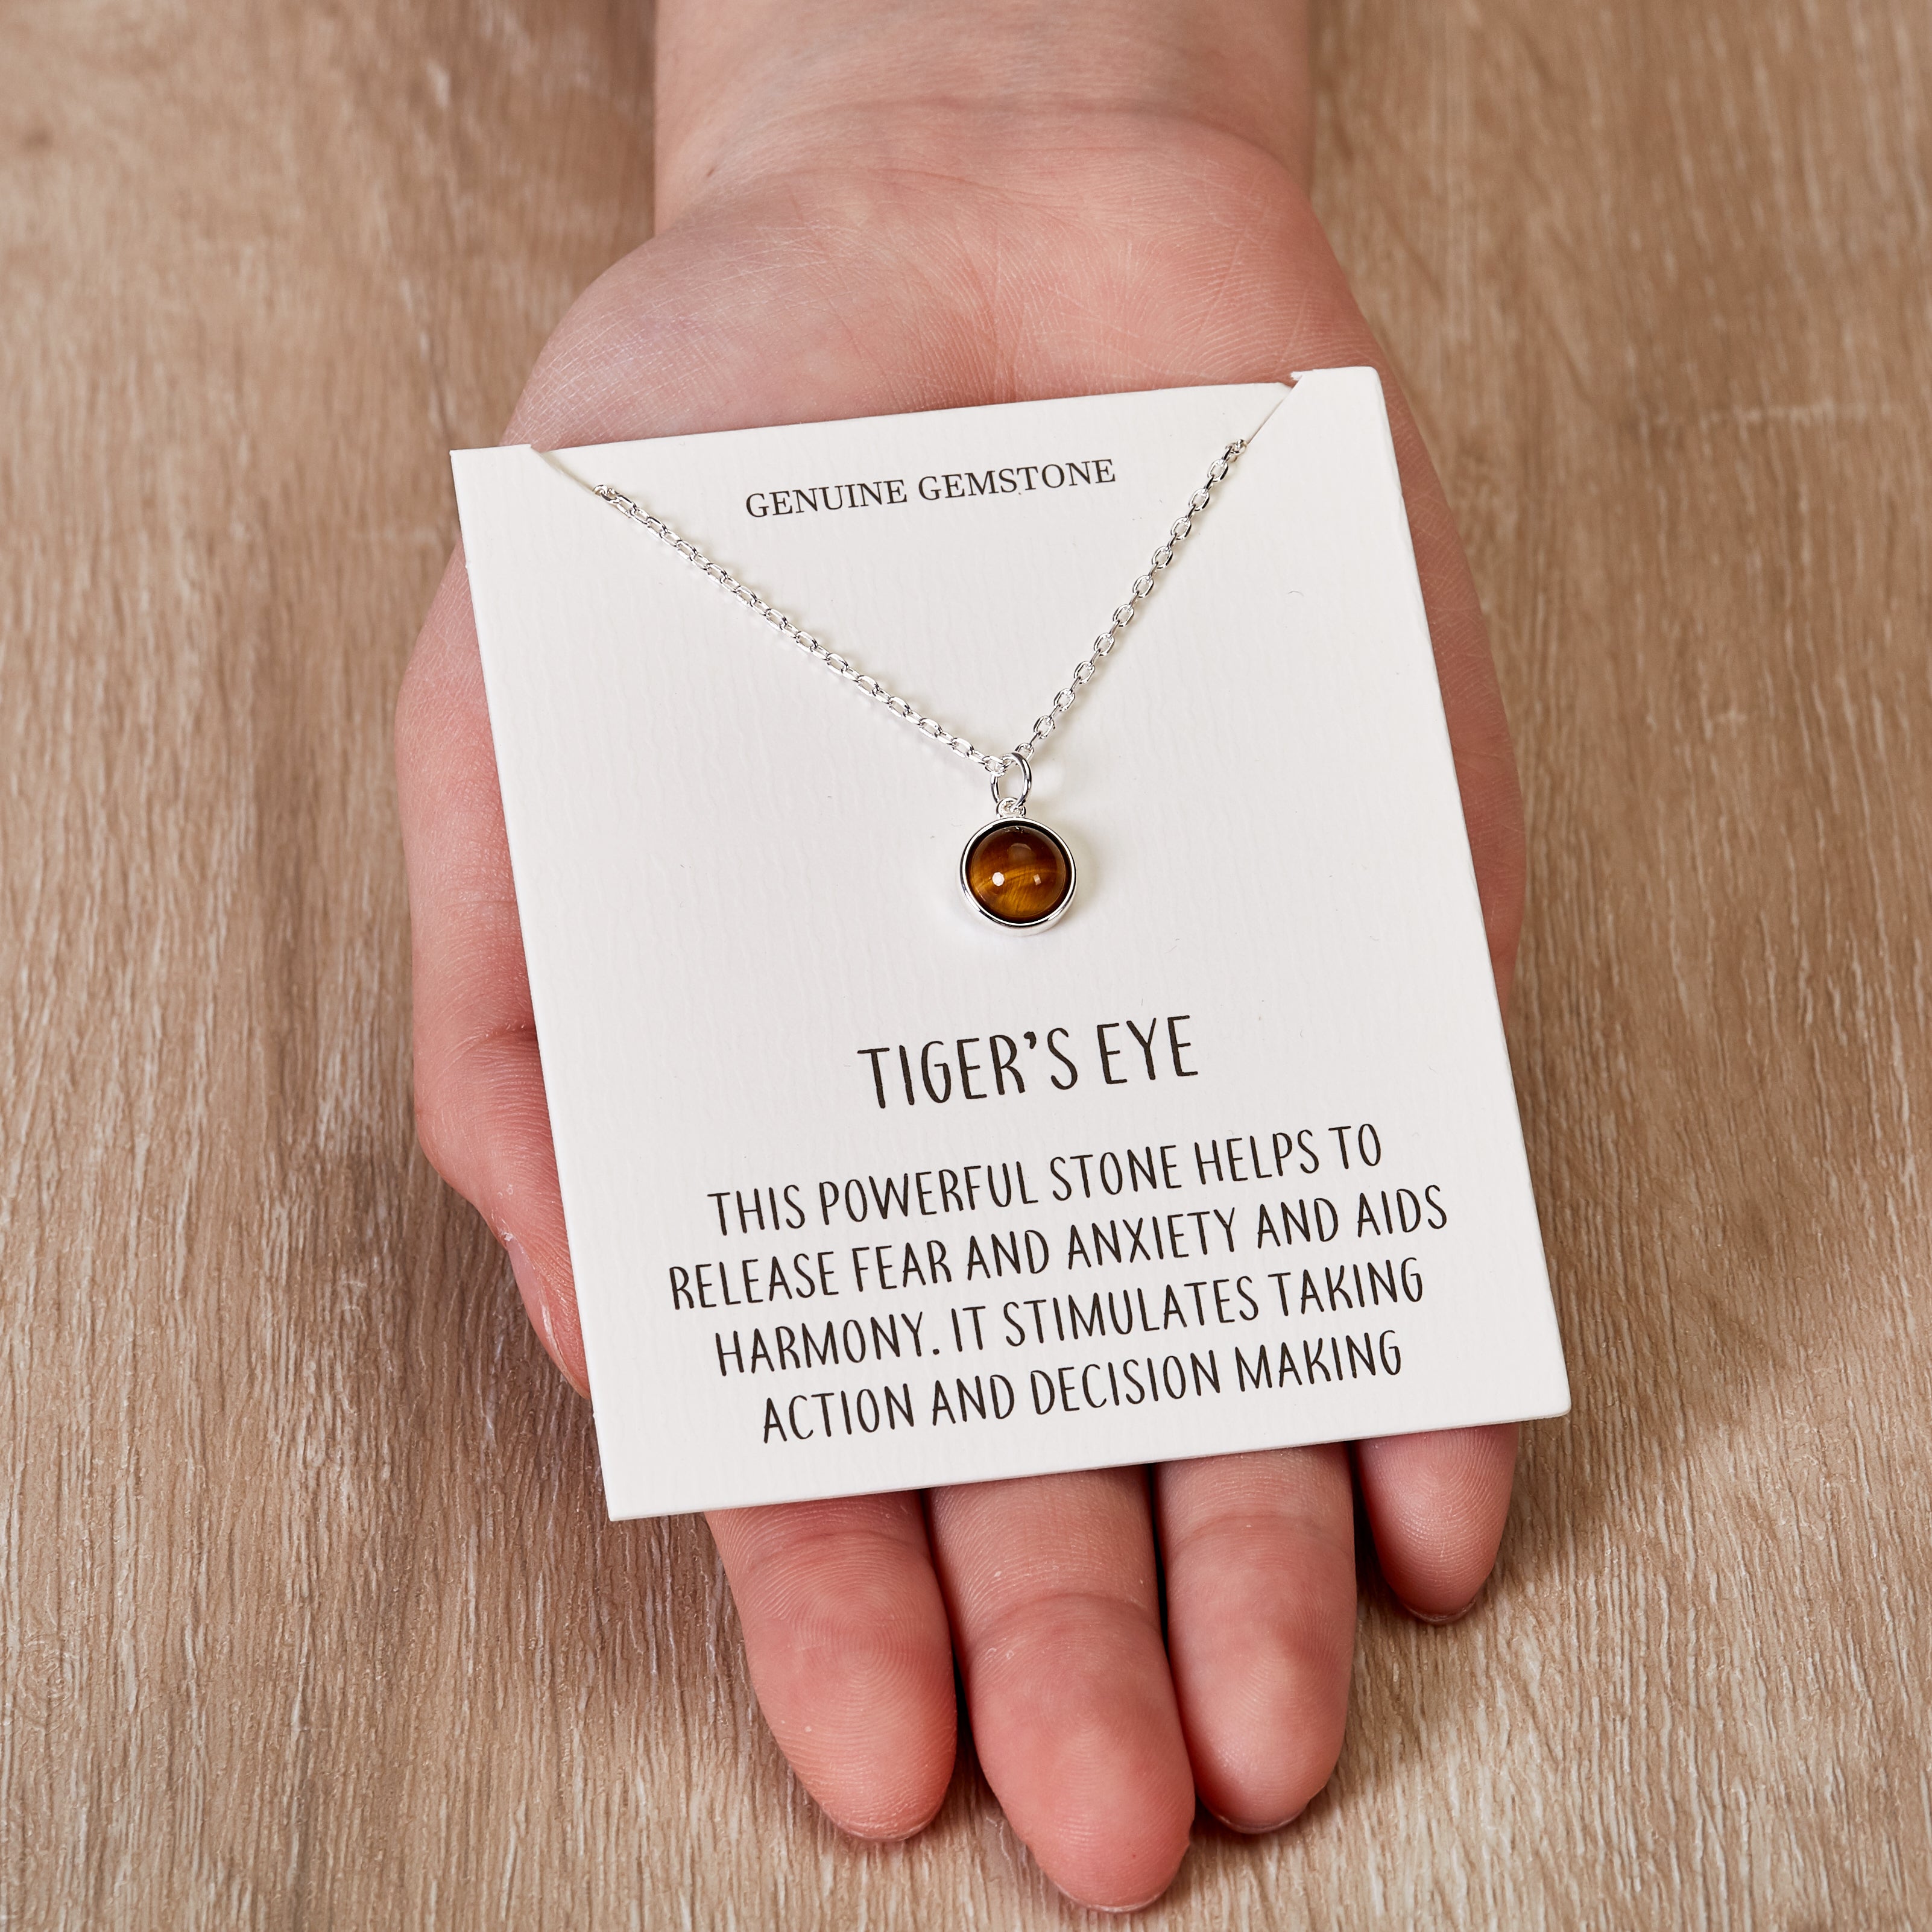 Tiger's Eye Necklace with Quote Card